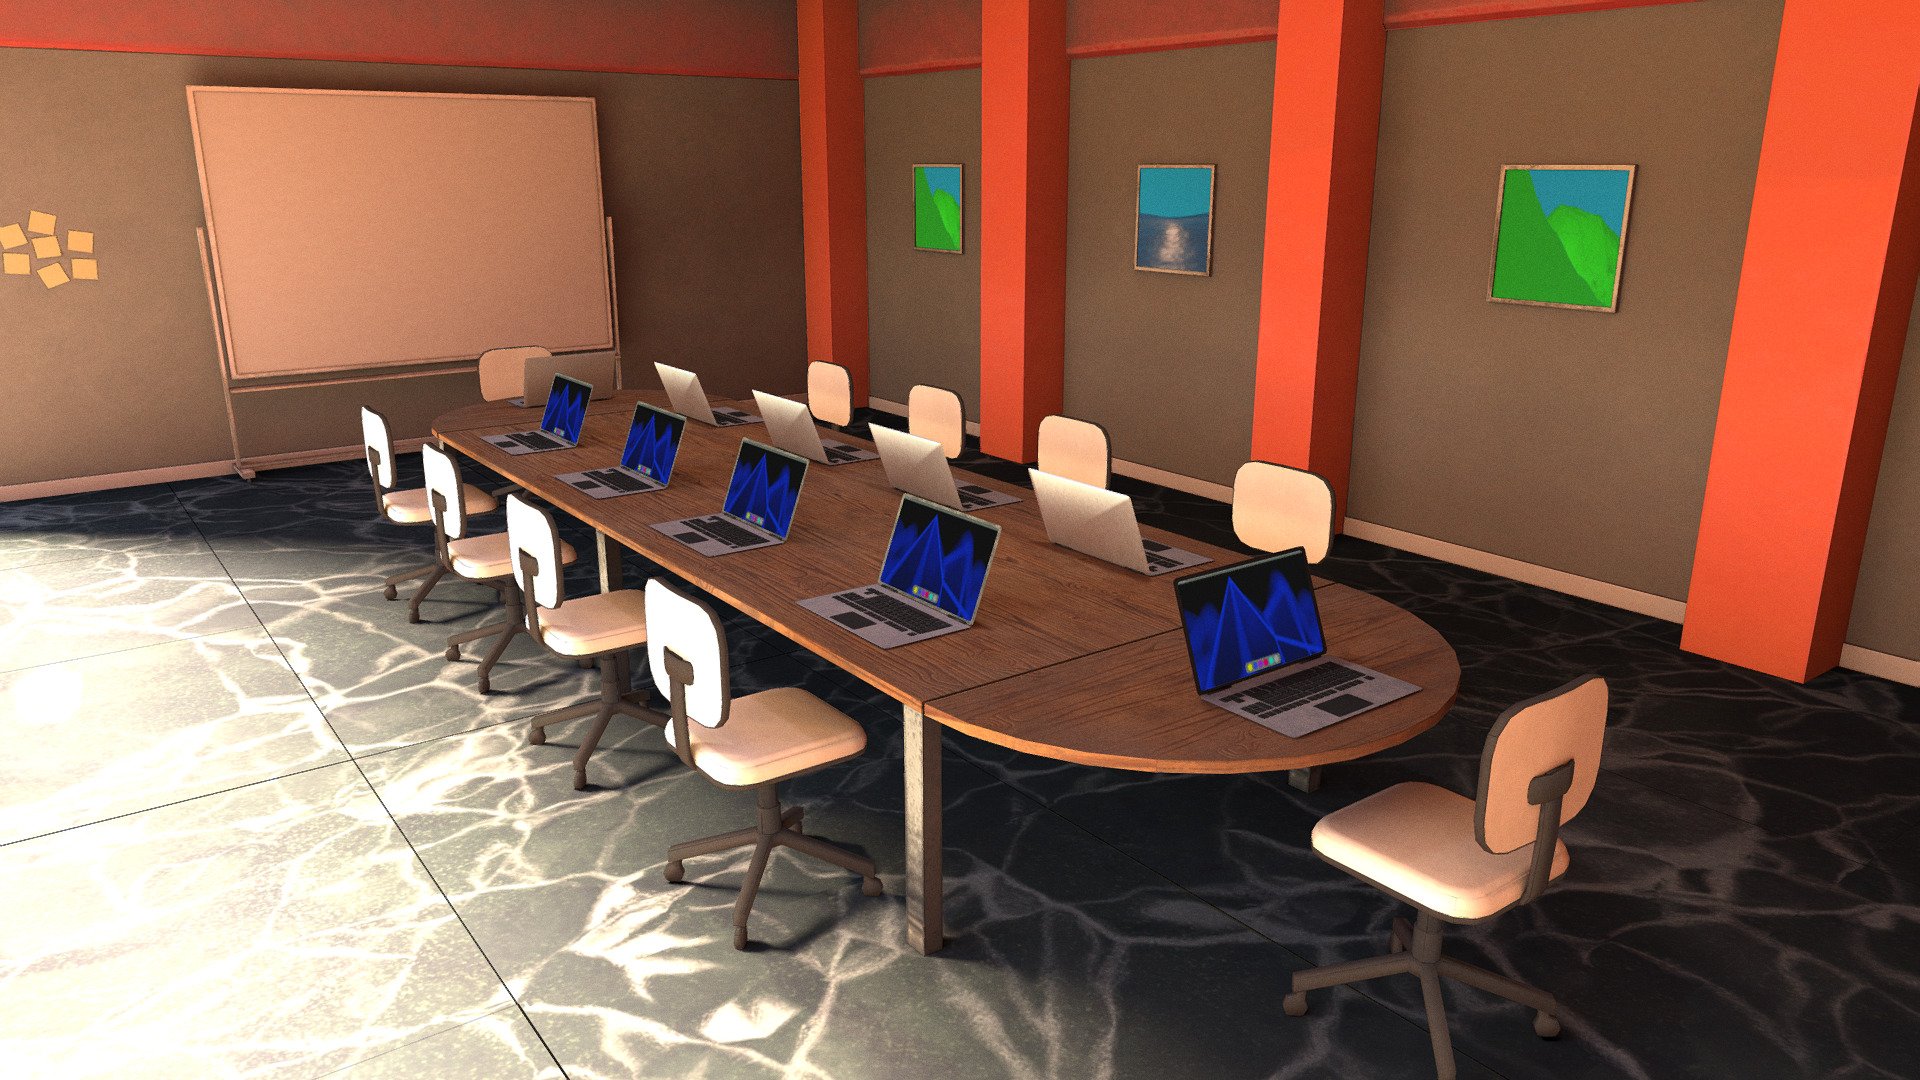 VR Conference Room modeled in Blender and textured in Substance Painter.

The scene has baked in textures 3d model